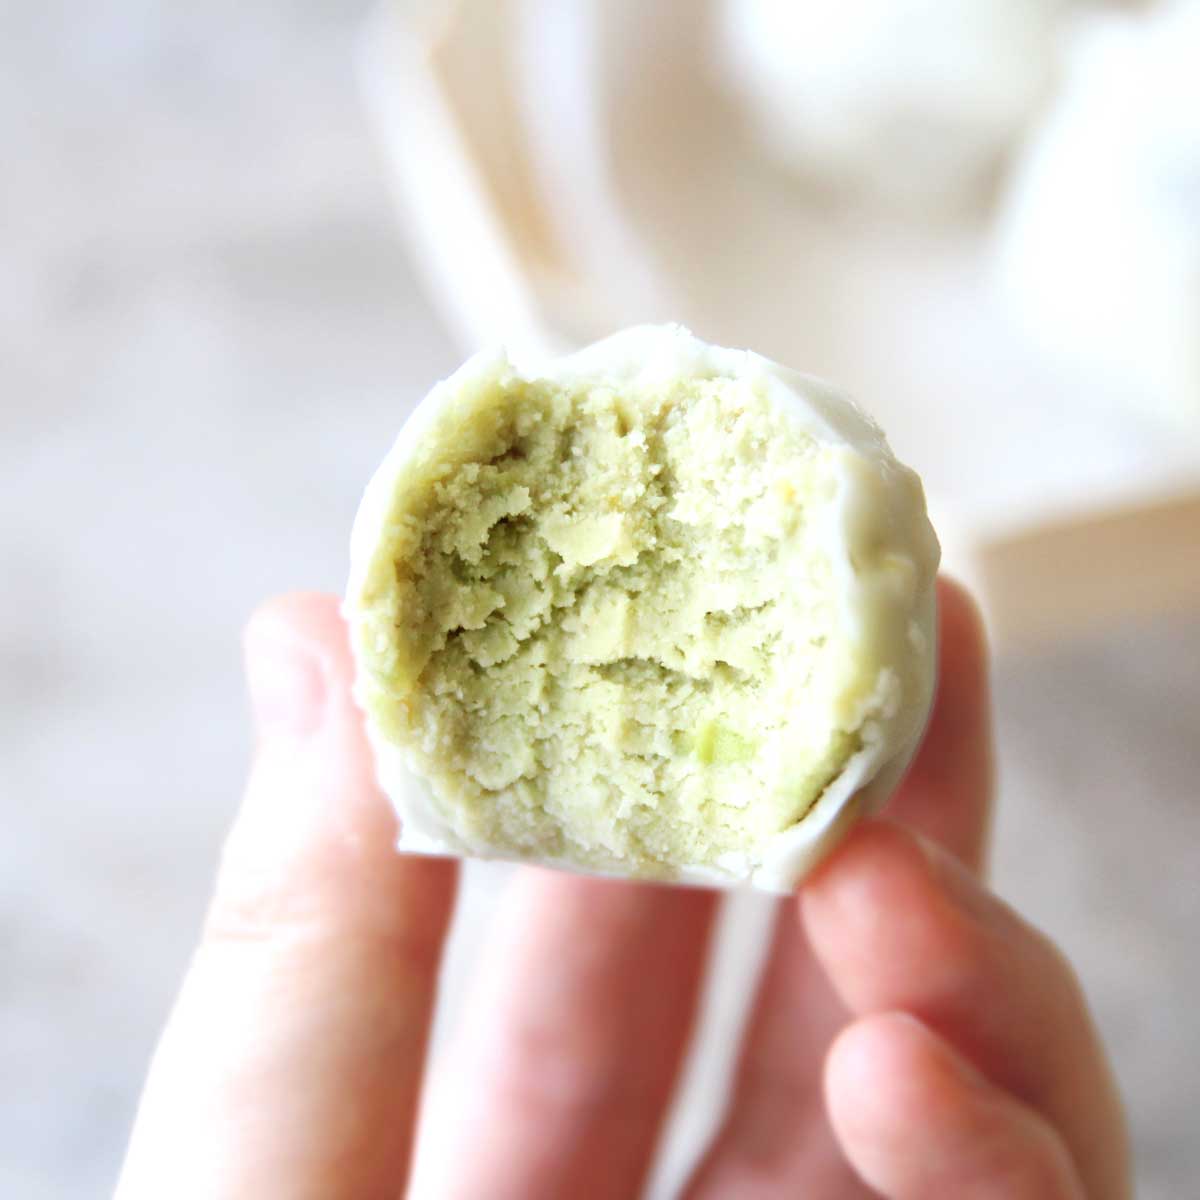 Easy Avocado Protein Balls with a White Chocolate Shell - Sweet Matcha Whipped Cream